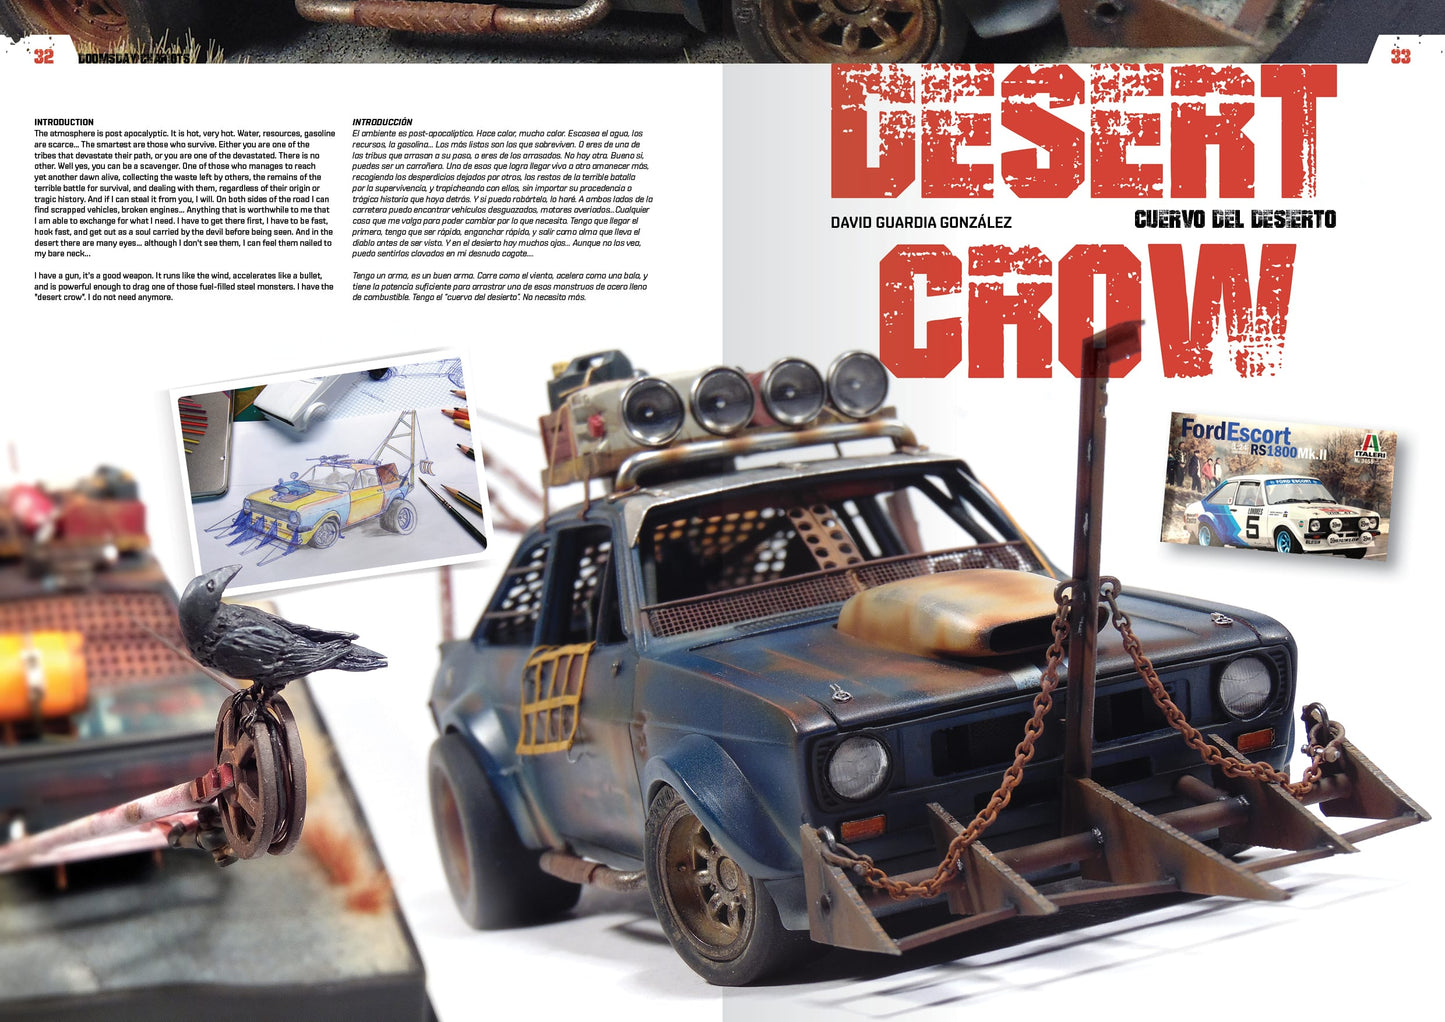 DOOMSDAY CHARIOTS – MODELING POST-APOCALYPTIC VEHICLES